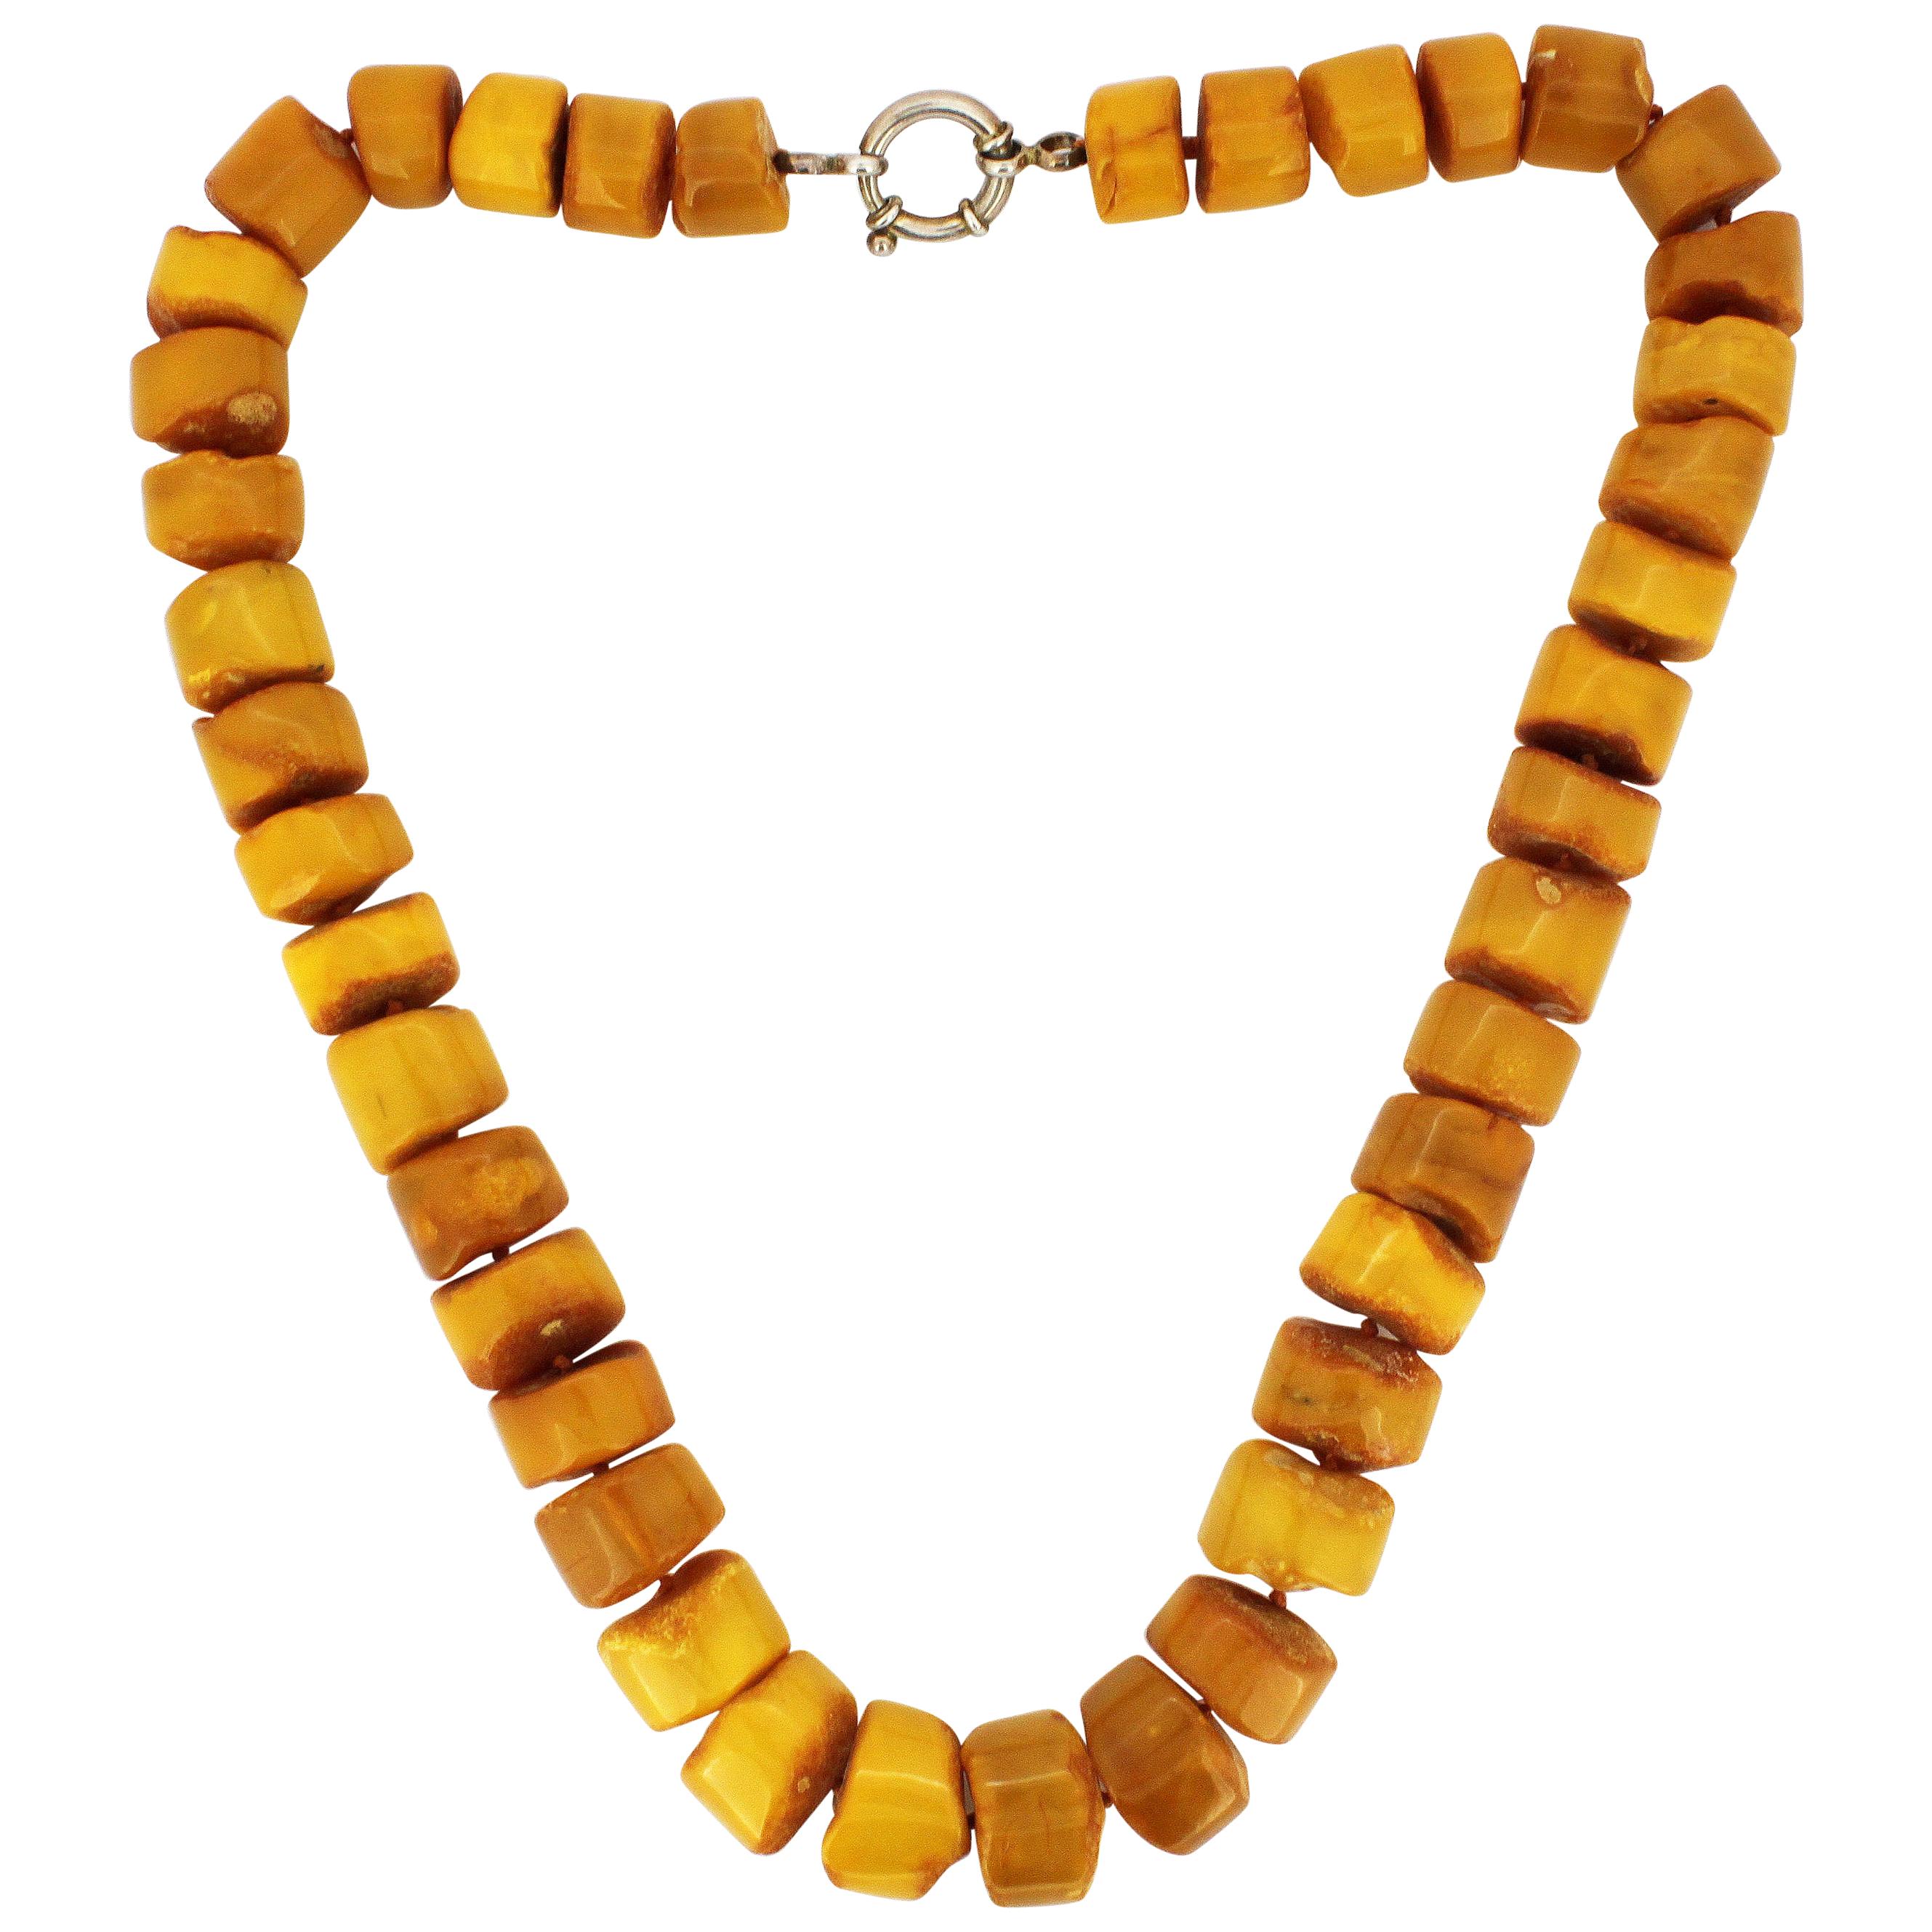 Natural Baltic Amber Necklace in the Form of Tablets